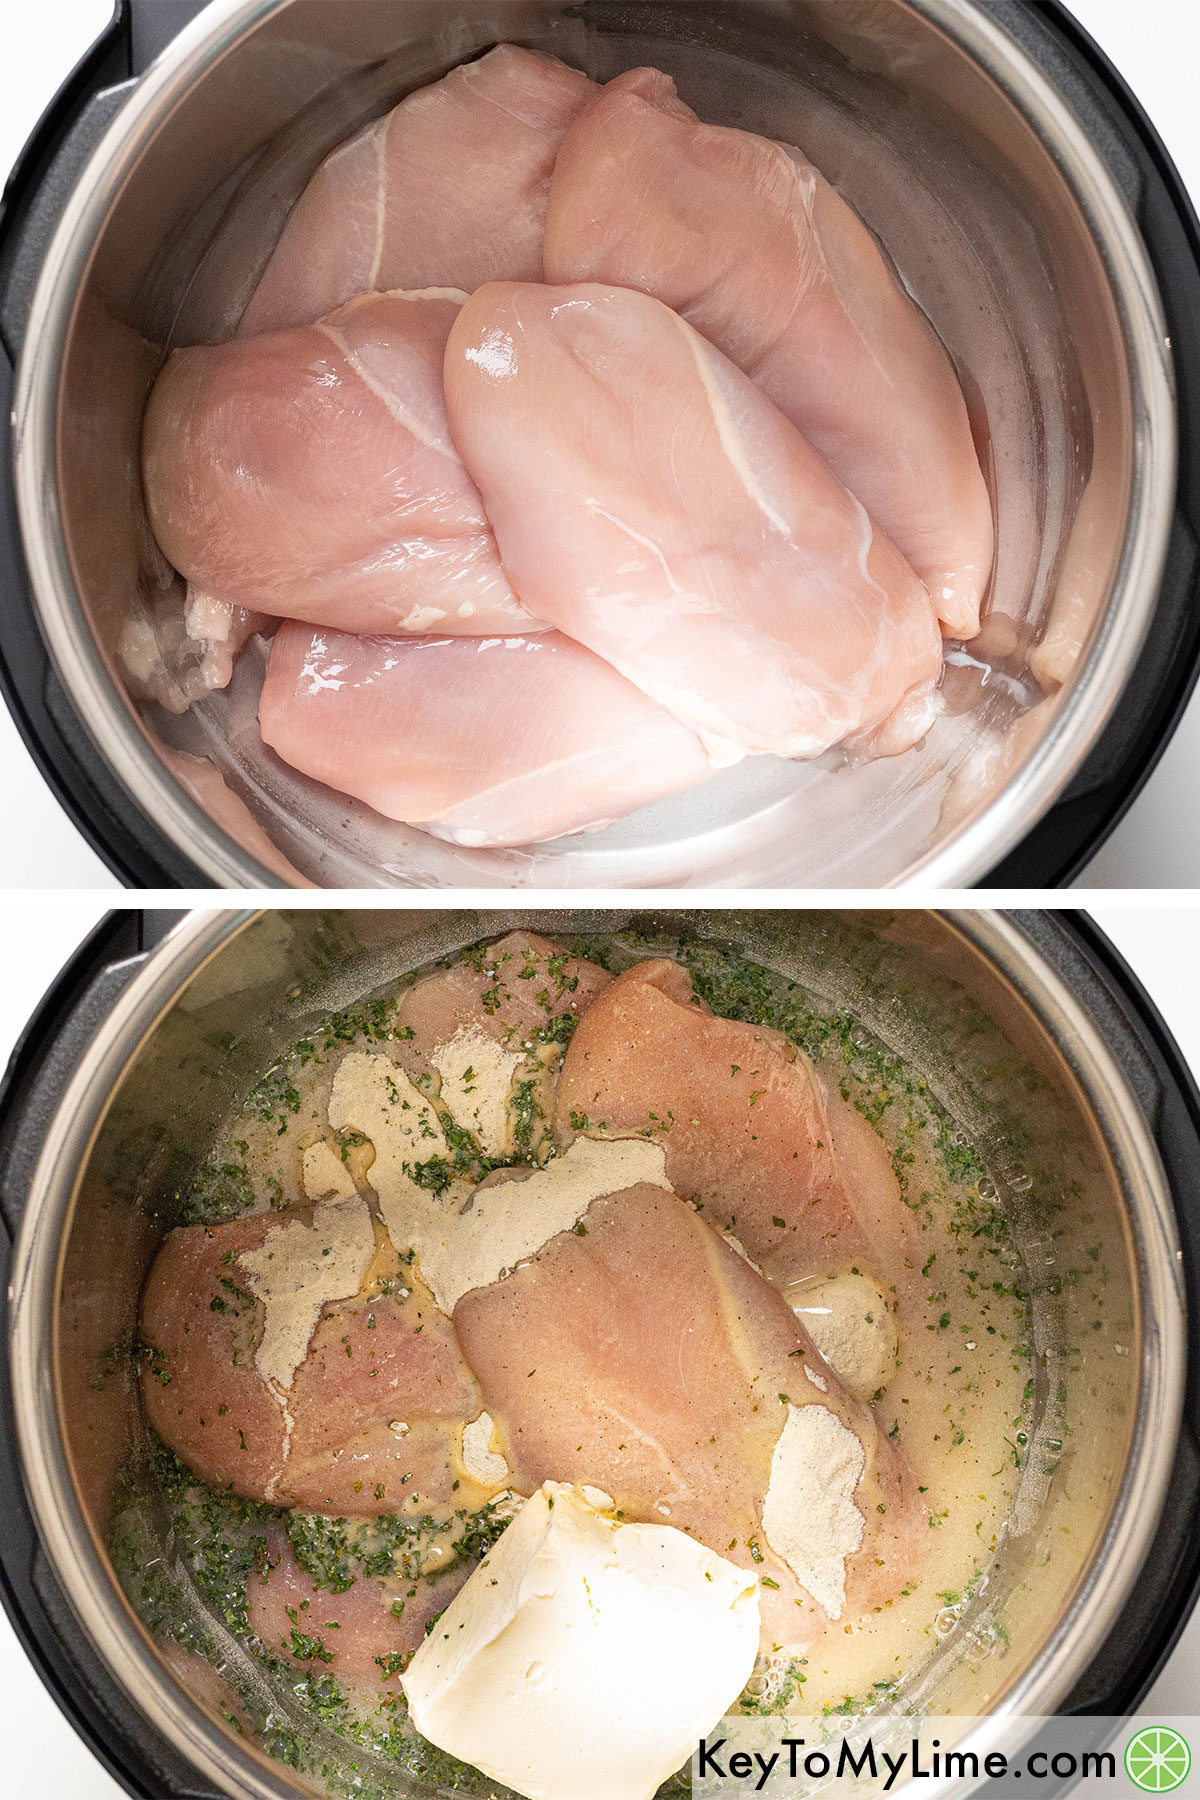 Adding raw chicken breasts, chicken broth, cream cheese, and seasonings to an Instant Pot.